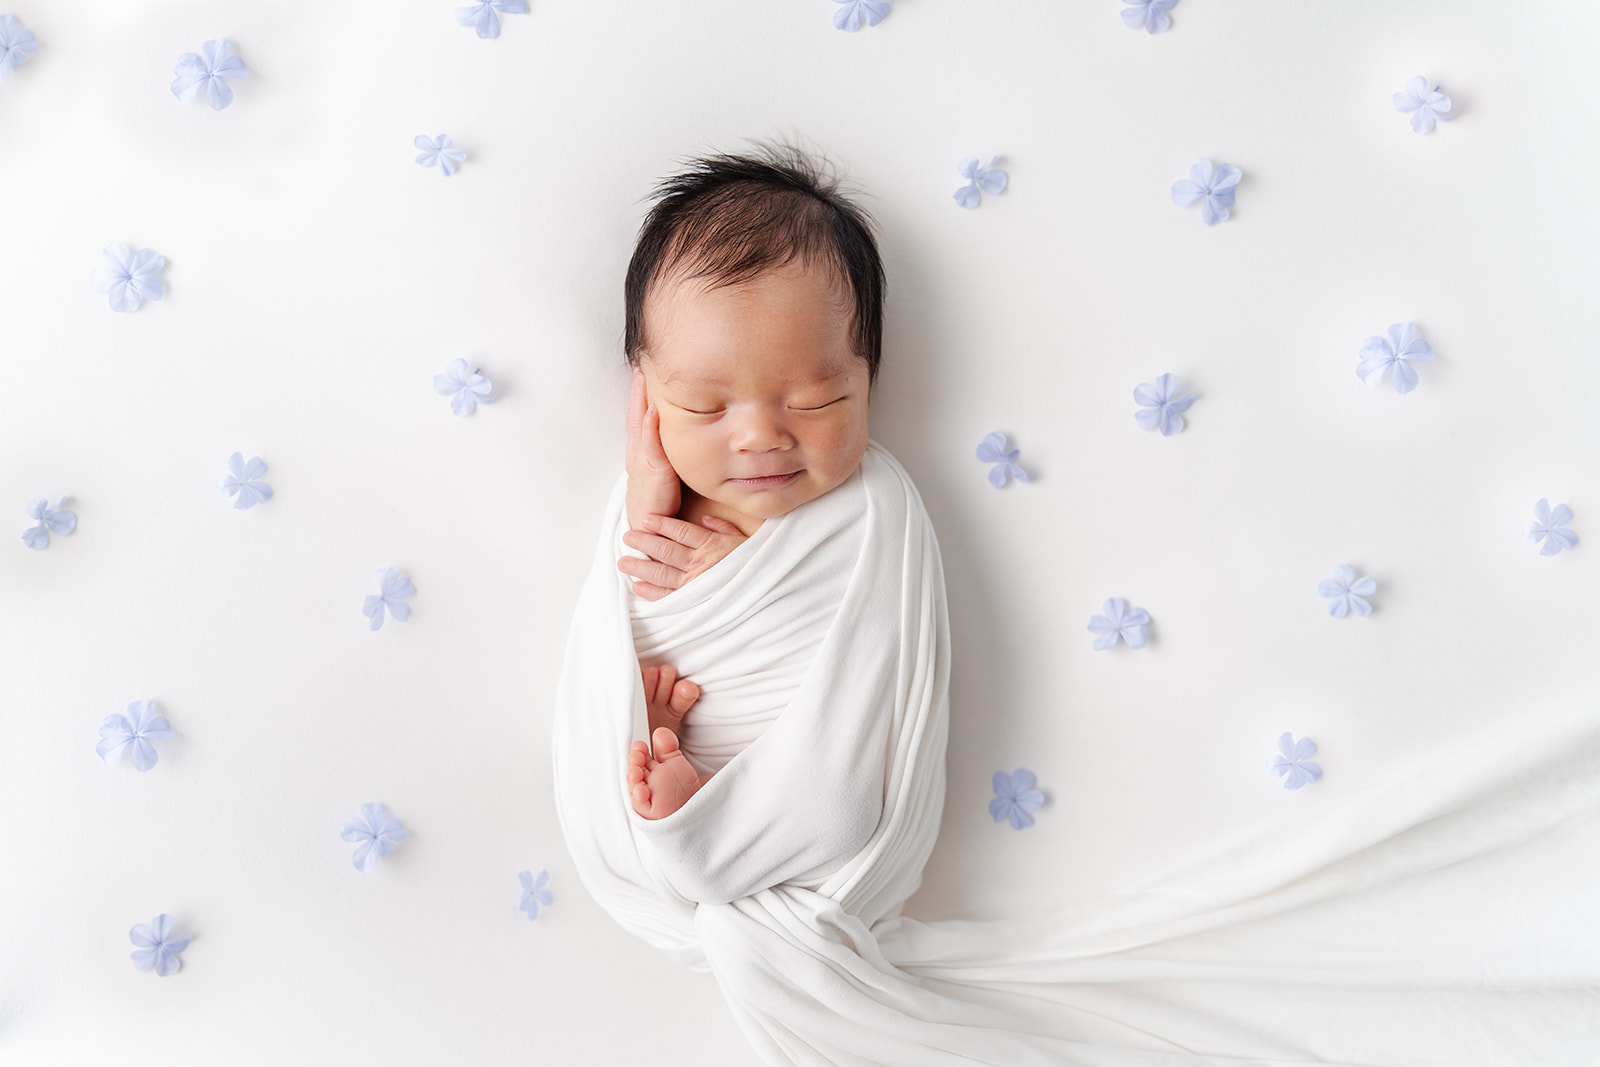 A newborn baby sleeps in a white swaddle surrounded by blue flowers in a studio